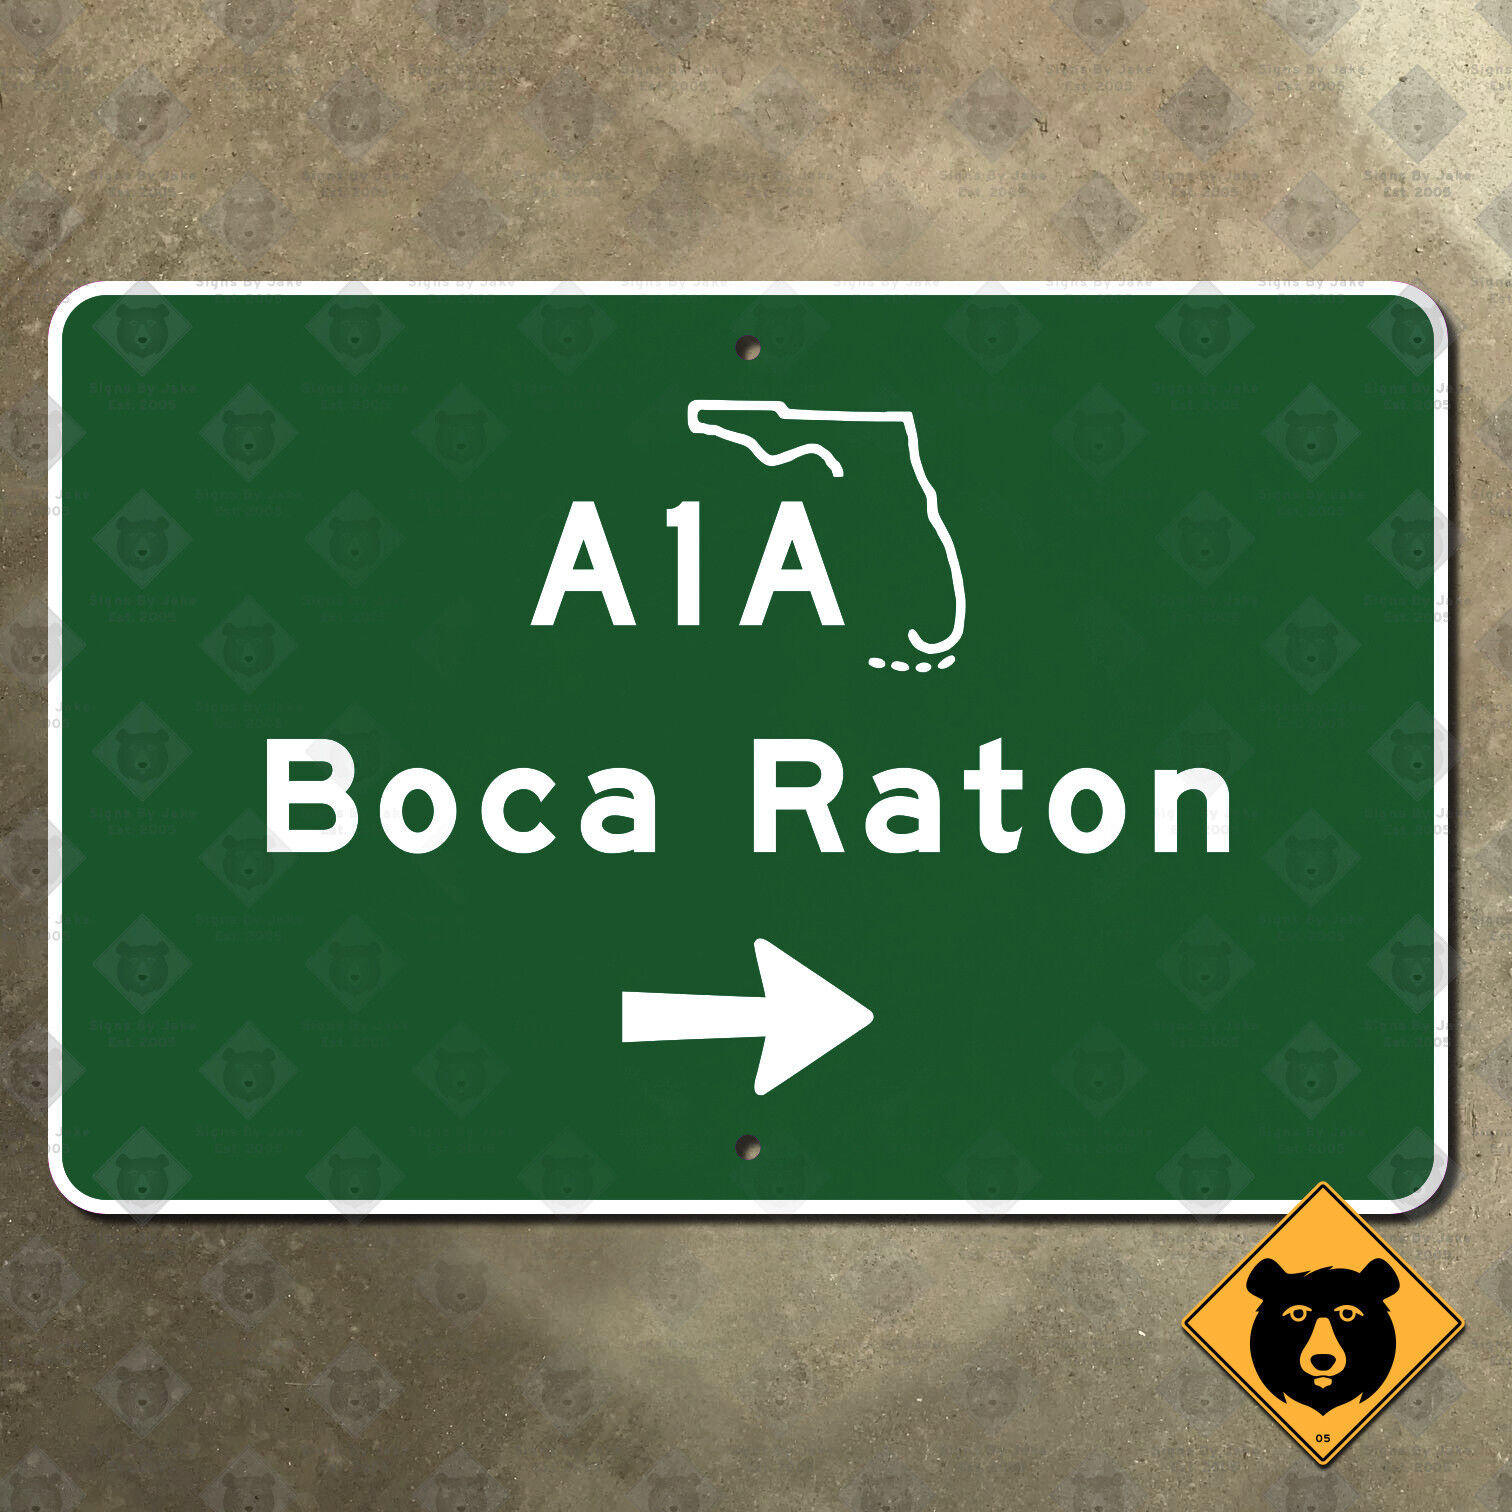 Florida Boca Raton state route A1A highway road freeway sign beach 1961 21x14